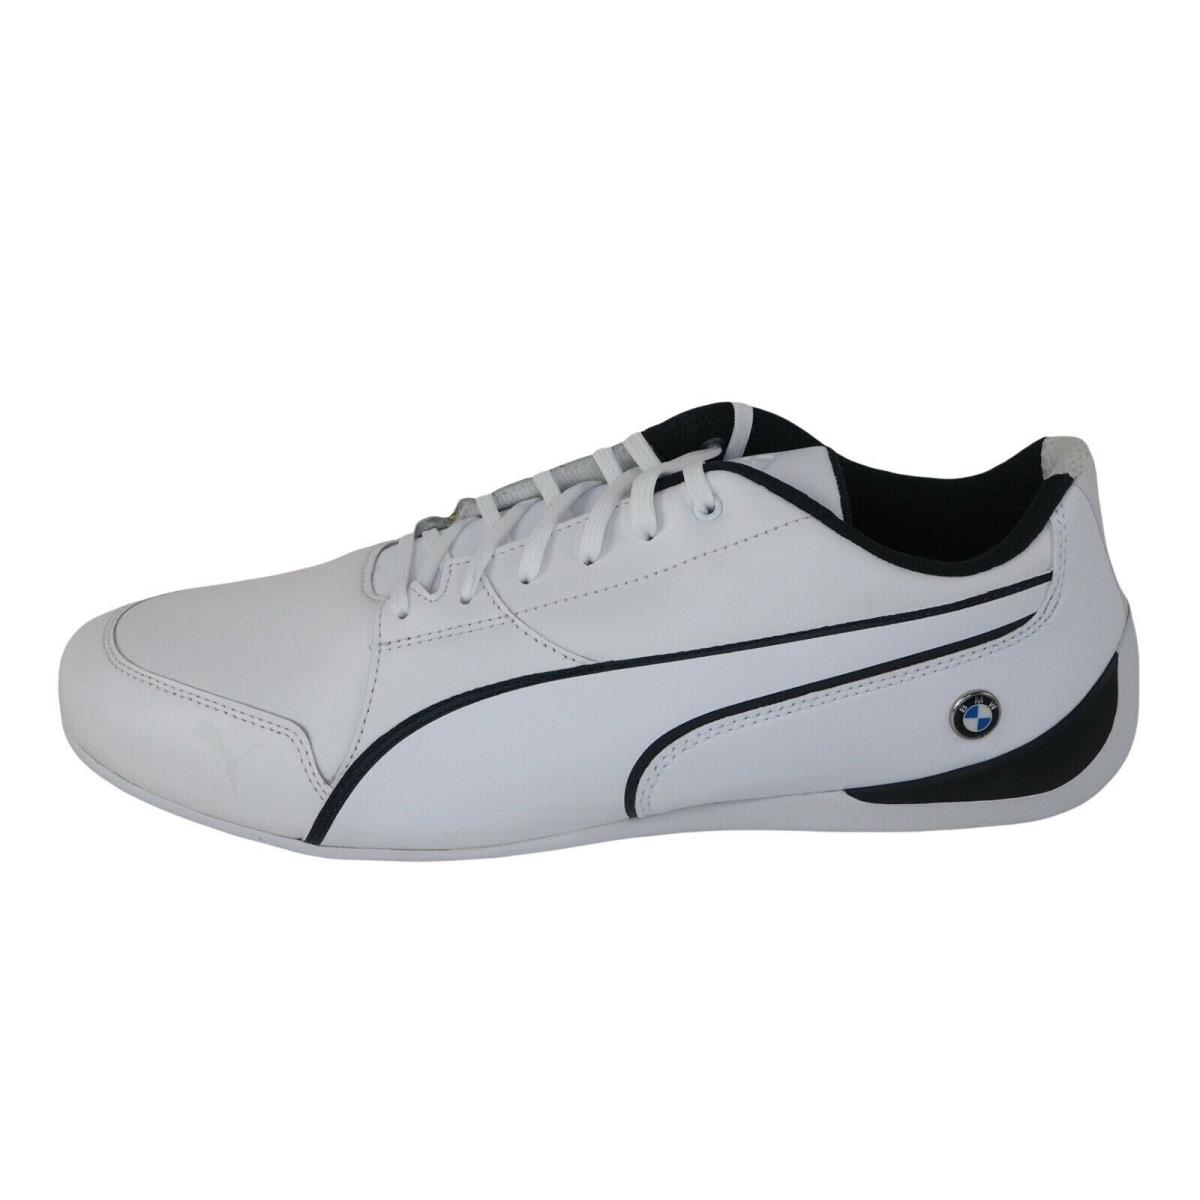 Puma Bmw MS Drift Cat 7 Sneakers 305986 02 Men s Shoes Leather White Size 13